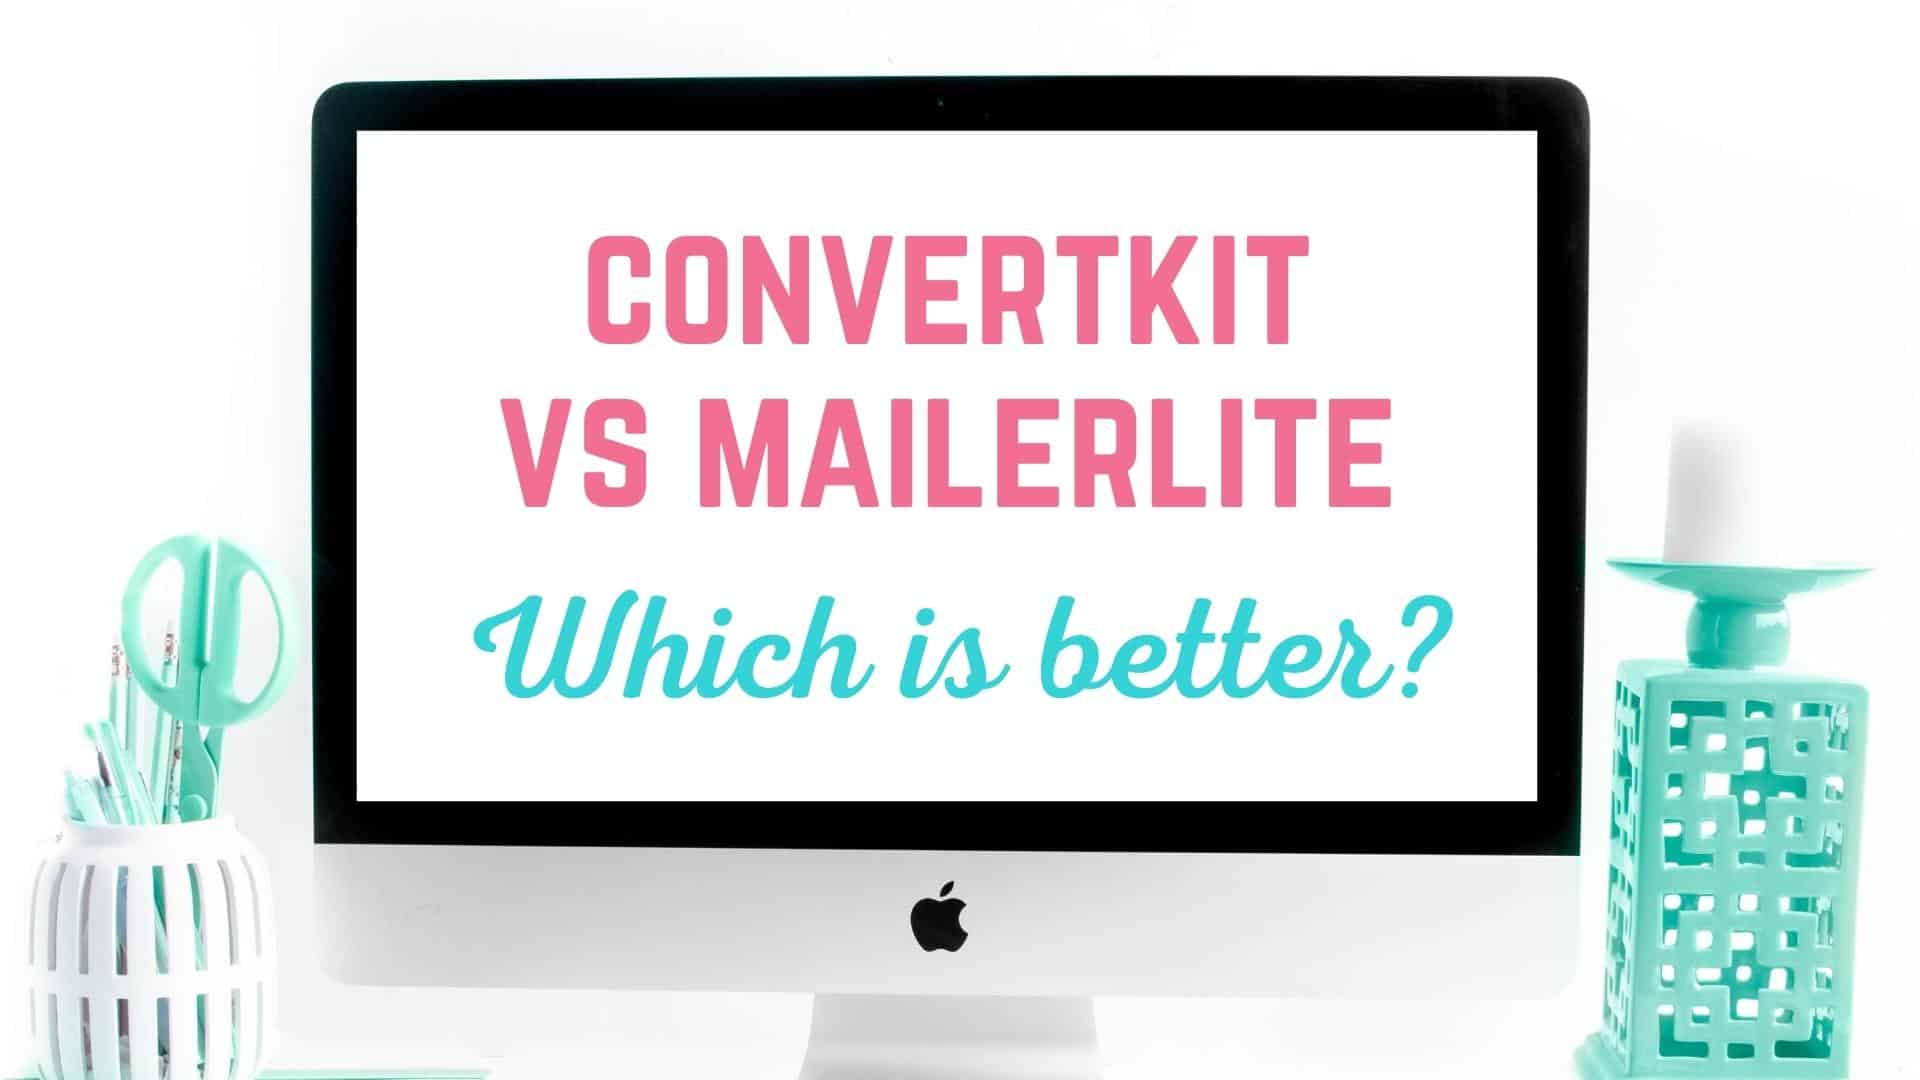 ConvertKit vs Mailerlite: Which Should You Choose?